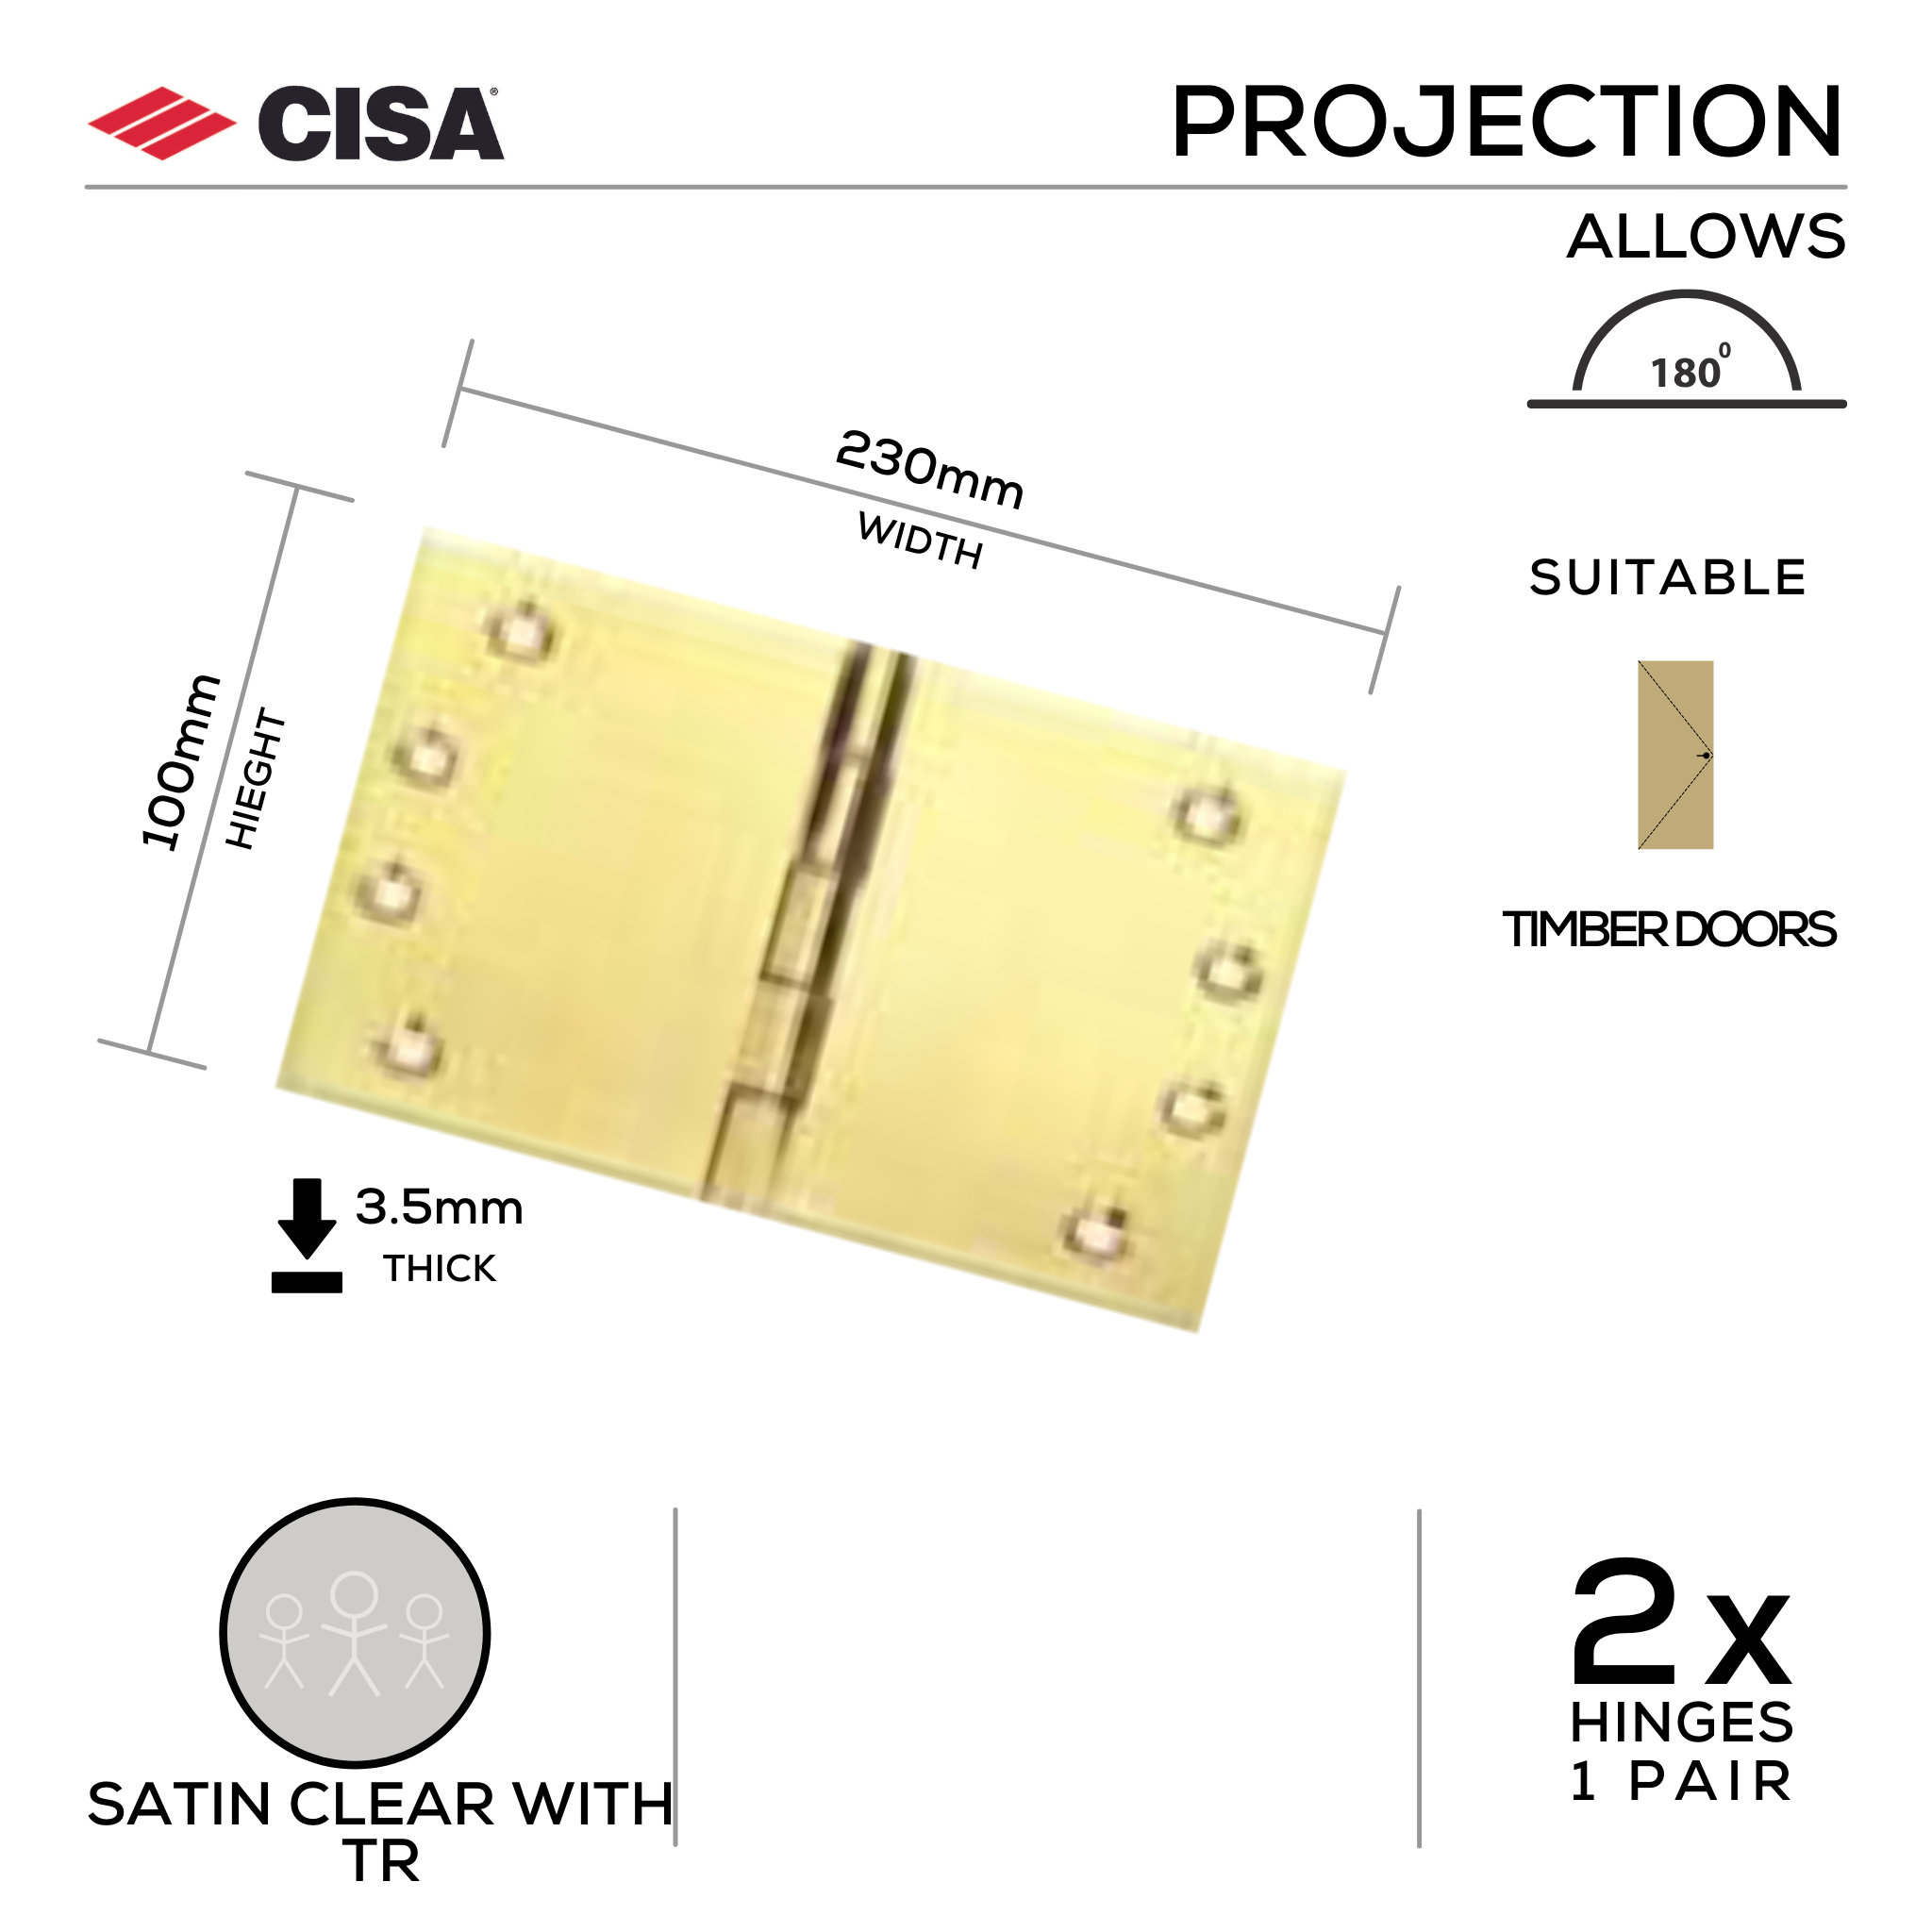 FH230X3-TR, Projection Hinge, 2 x Hinges (1 Pair), 100mm (h) x 230mm (w) x 3.5mm (t), Satin with Tarnish Resistant, CISA